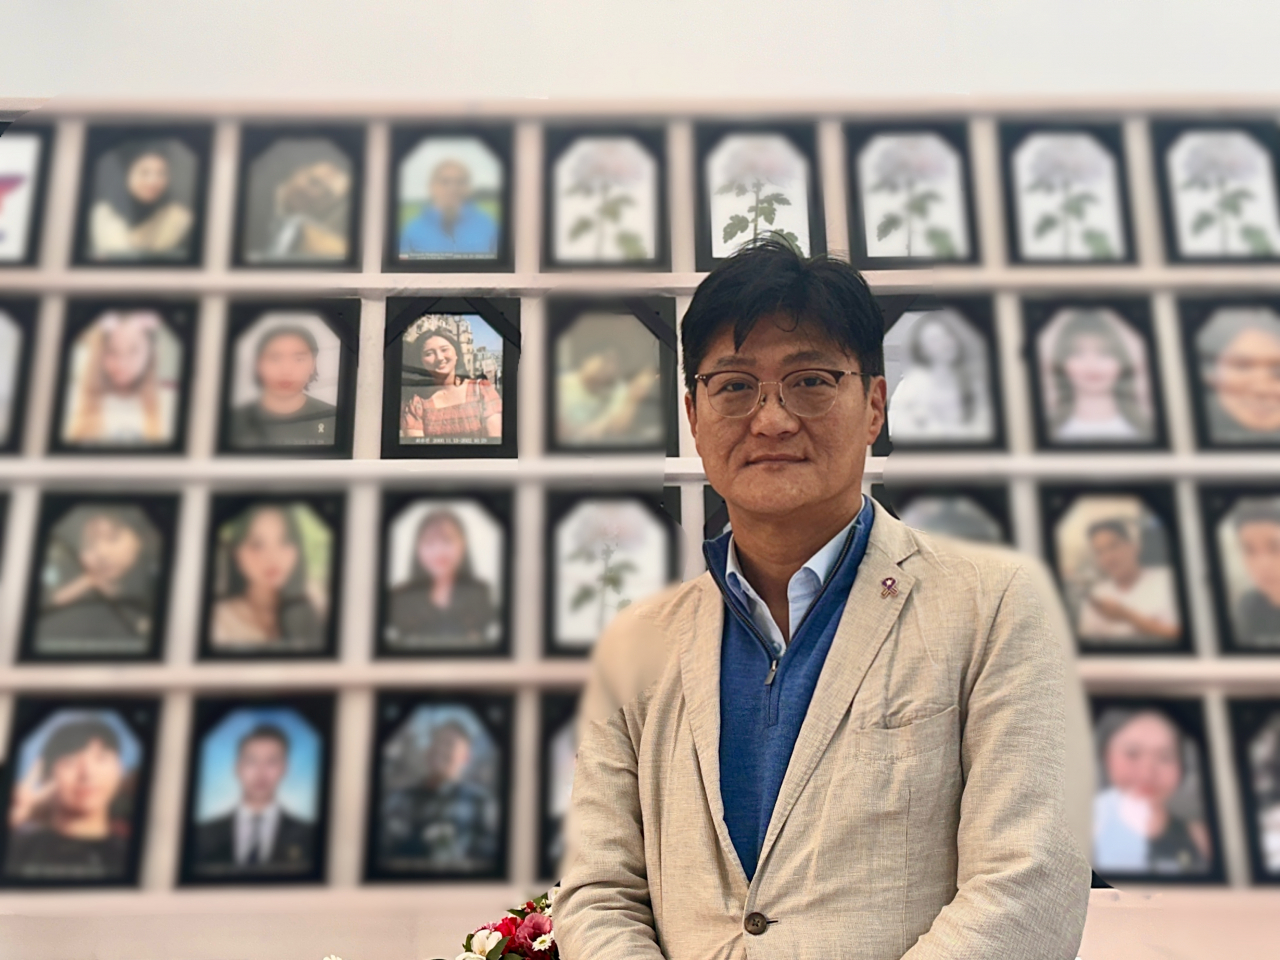 Choi Joung-joo, the father of the late Choi Yu-jin, takes a photo with Choi Yu-jin's portrait at the makeshift memorial near Seoul City Hall. (Lee Jung-joo/The Korea Herald)